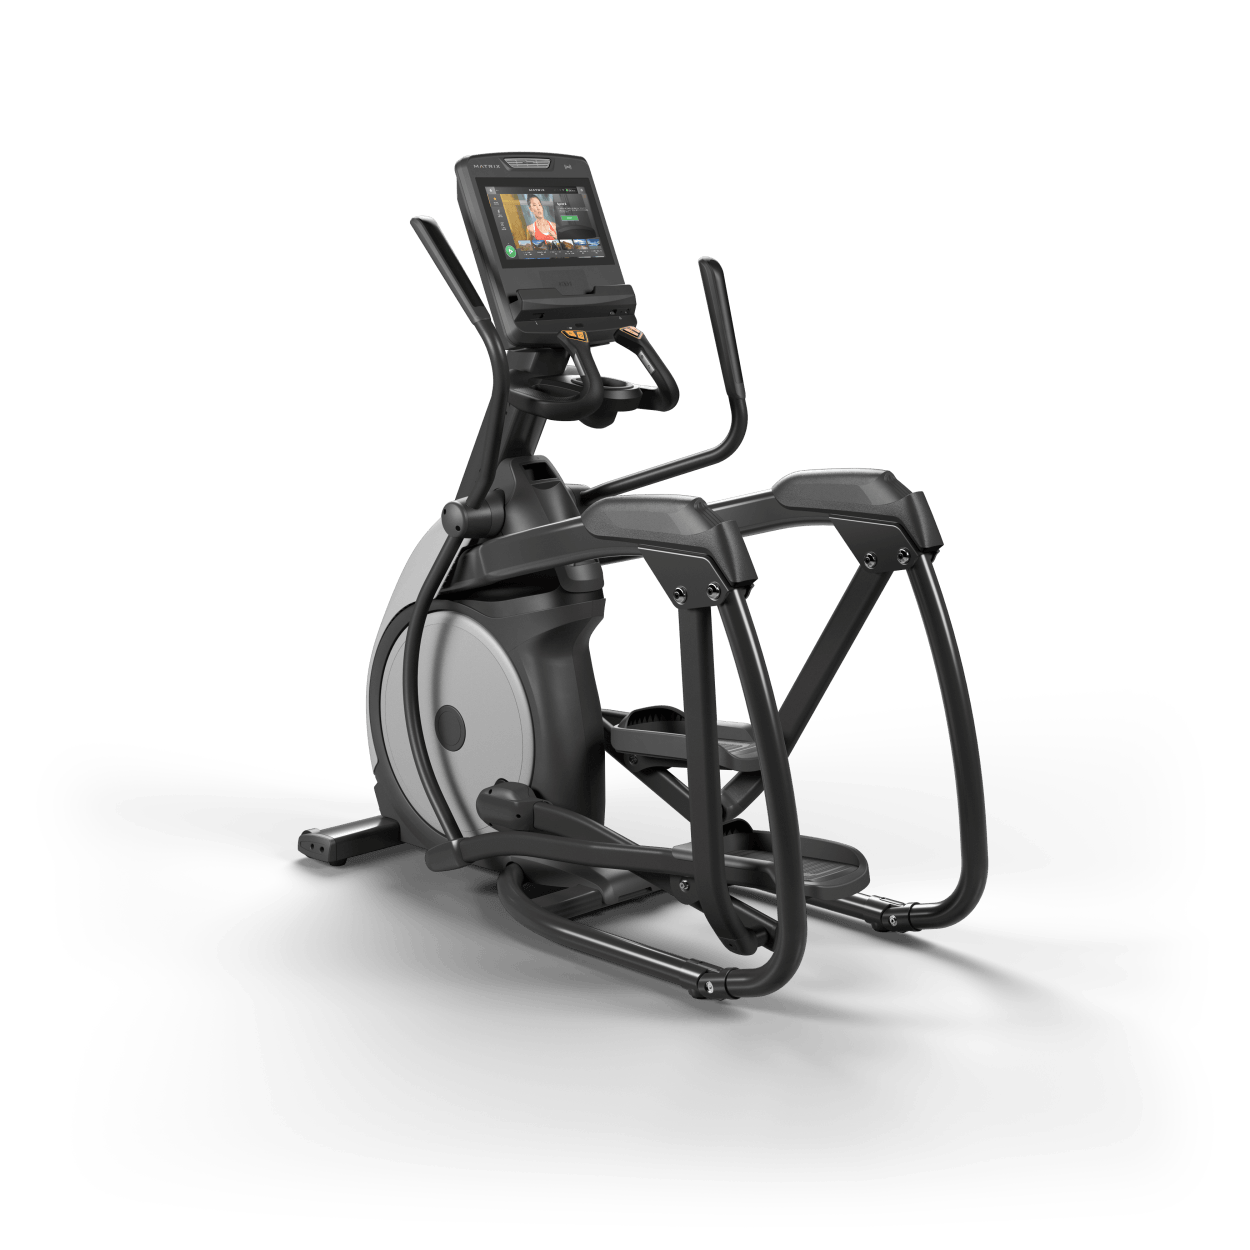 Matrix Fitness Performance Elliptical with Touch Console full view | Fitness Experience